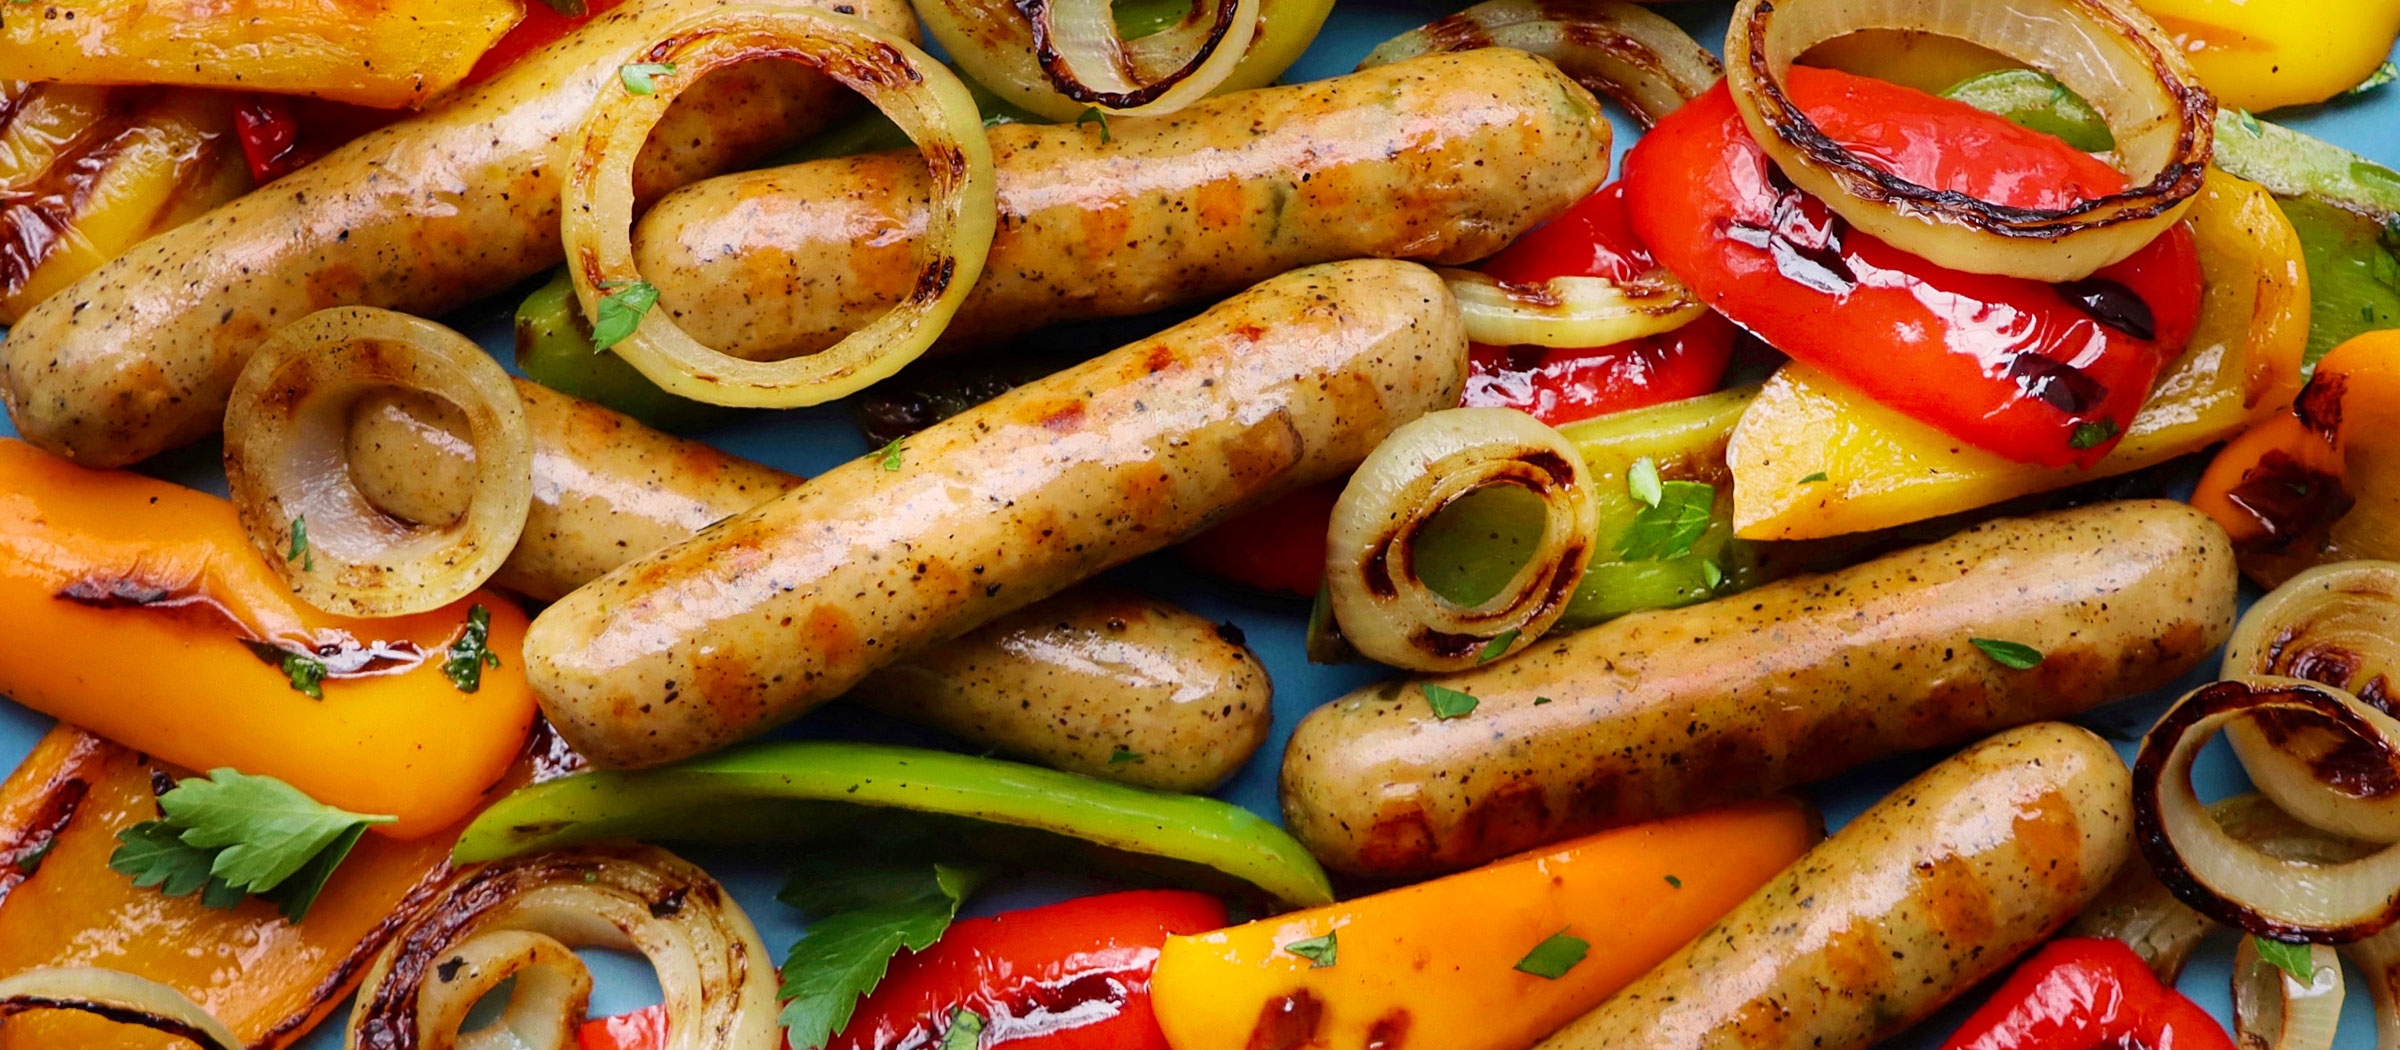 Grilled Gilbert's Craft Sausages